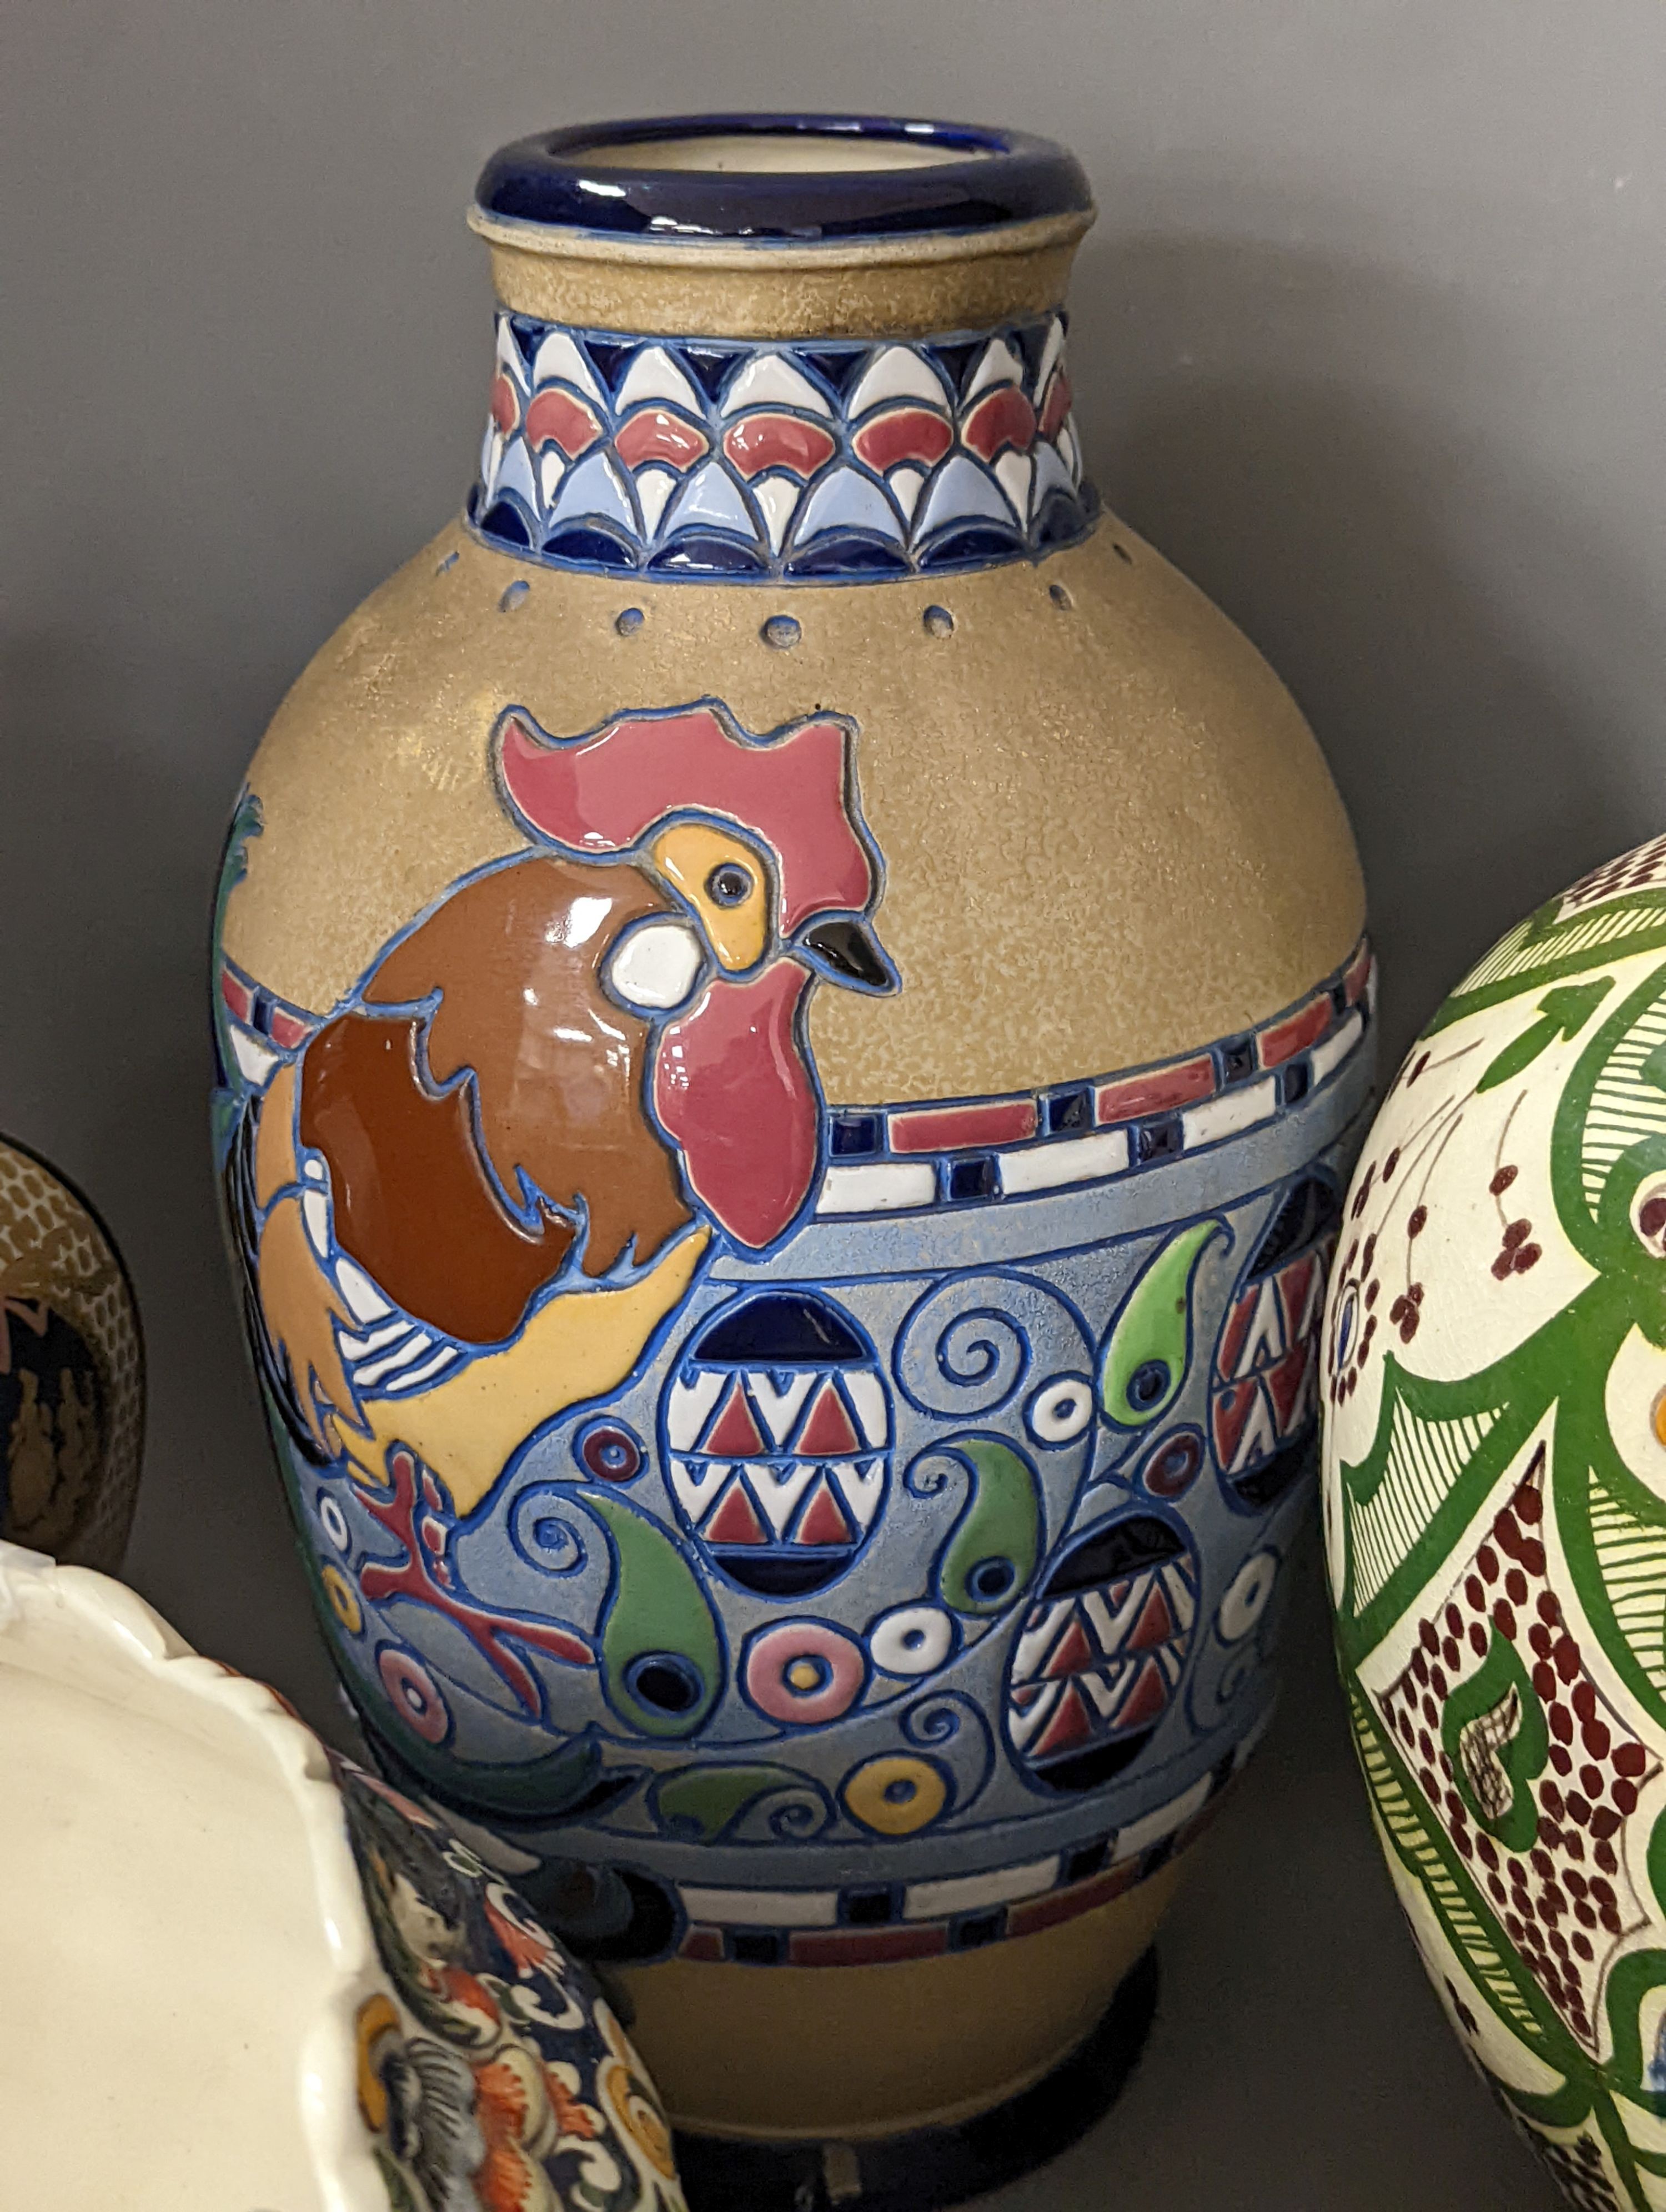 A Mont Saint Michael jardiniere, a lidded jar, two vases and an Amphora chicken decorated vase, Amphora vase 36 cms high.